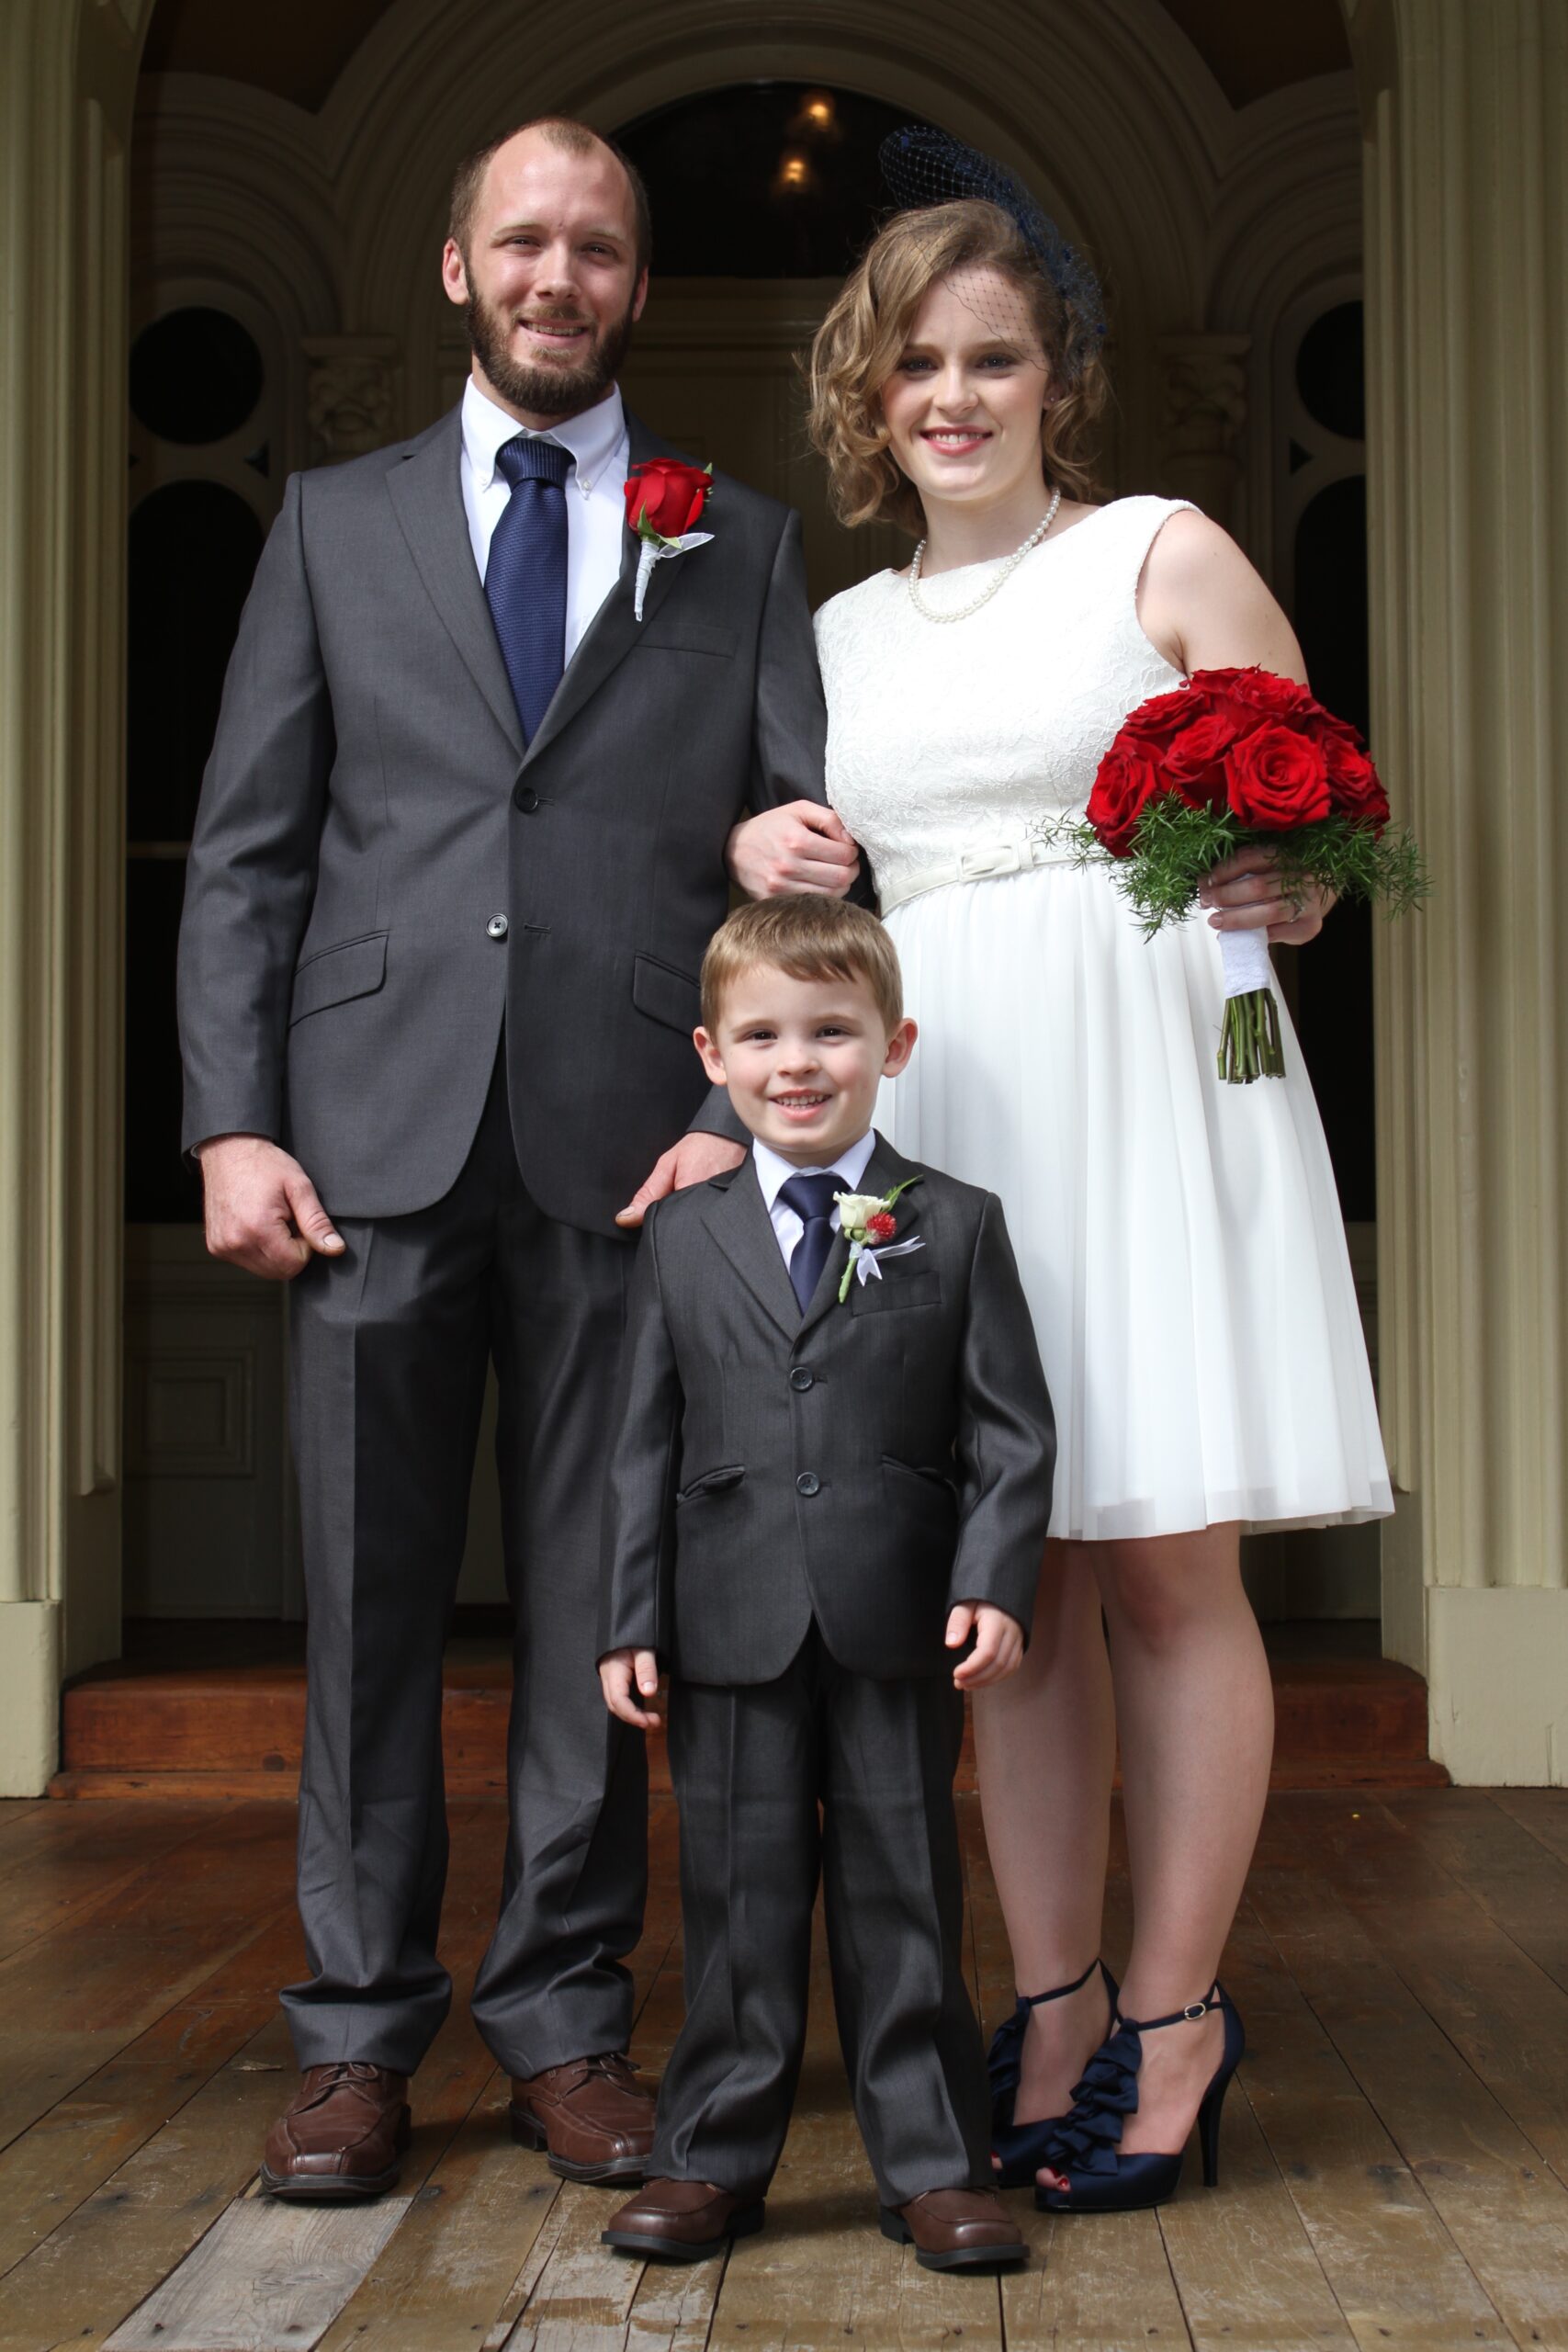 Groom, wearing a grey suit, blue tie and red rose boutonniere links arms with the bride. The bride, wearing a white lace sundress and navy bird cage veil with navy ruffled heels, holds a large bouquet of red roses. Their son, wearing a gray suit and navy tie smiles at the camera. The ring bearer has a small white rose boutonniere.